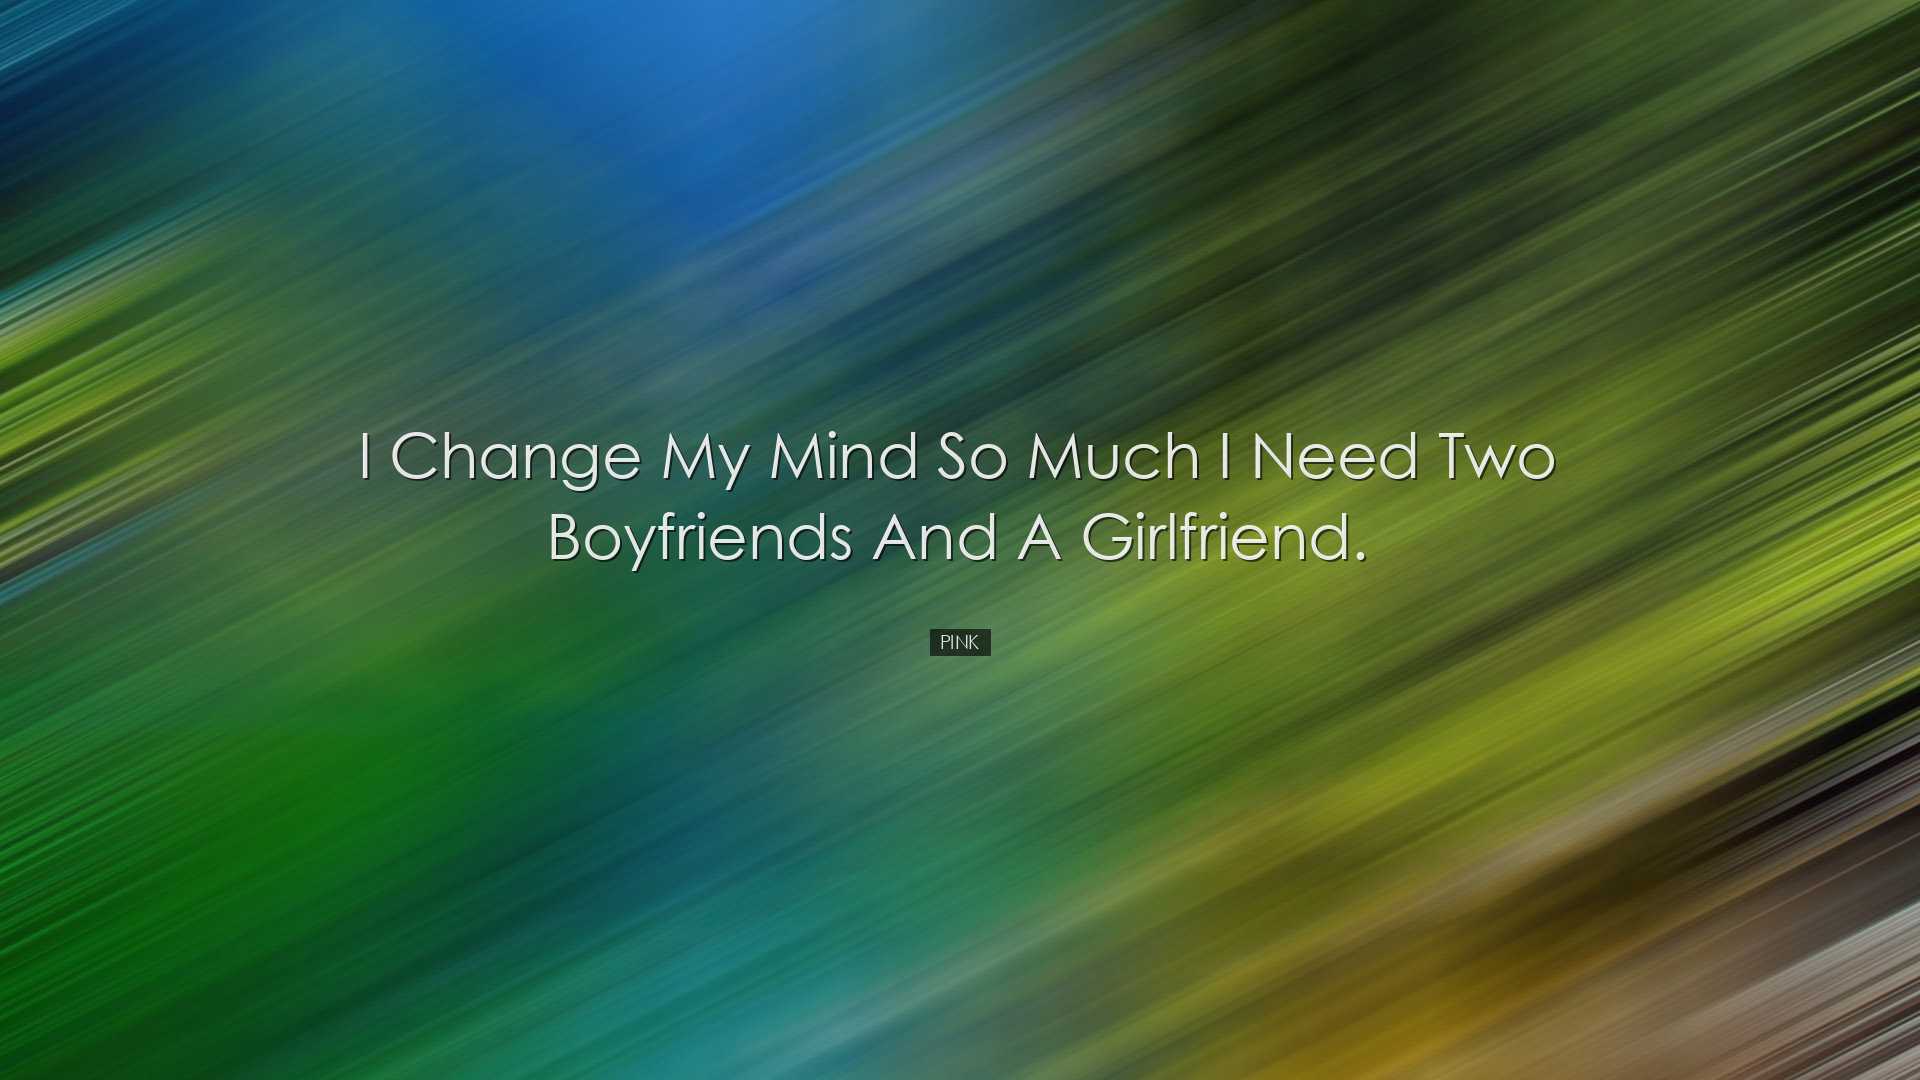 I change my mind so much I need two boyfriends and a girlfriend. -